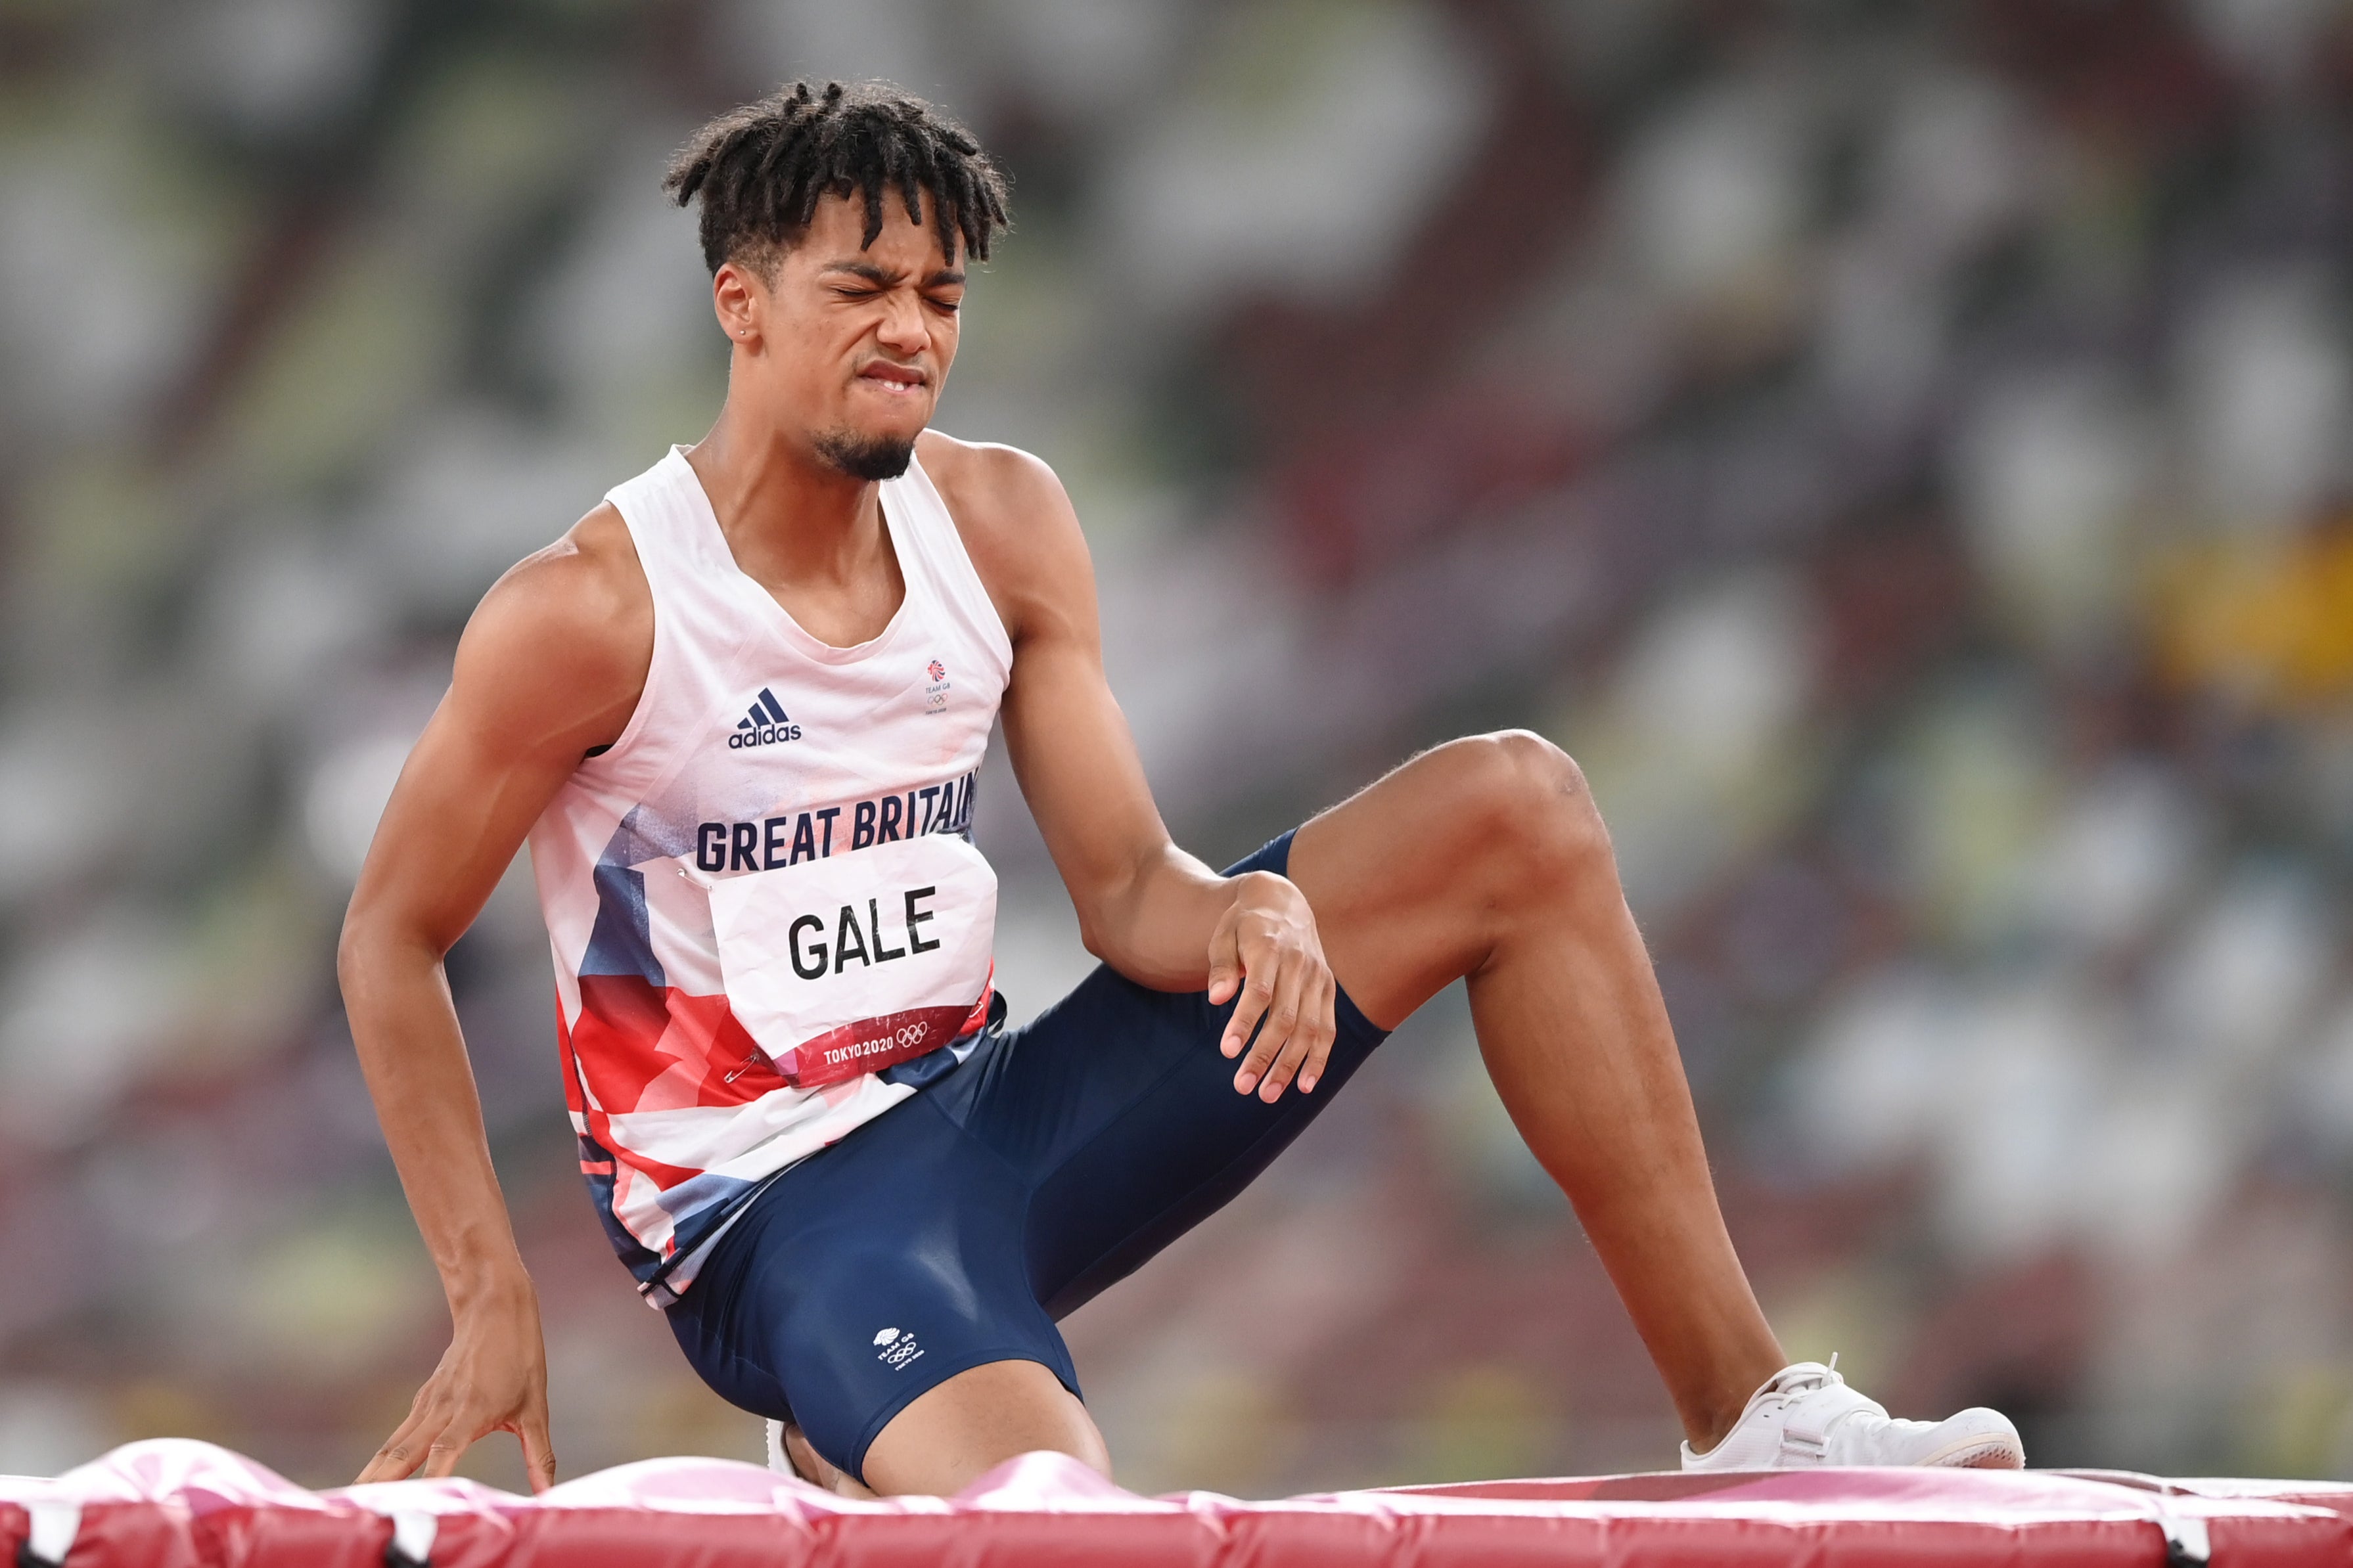 <p>Tom Gale reached the Olympic high jump final at Tokyo 2020 but things turned sour afterwards </p>